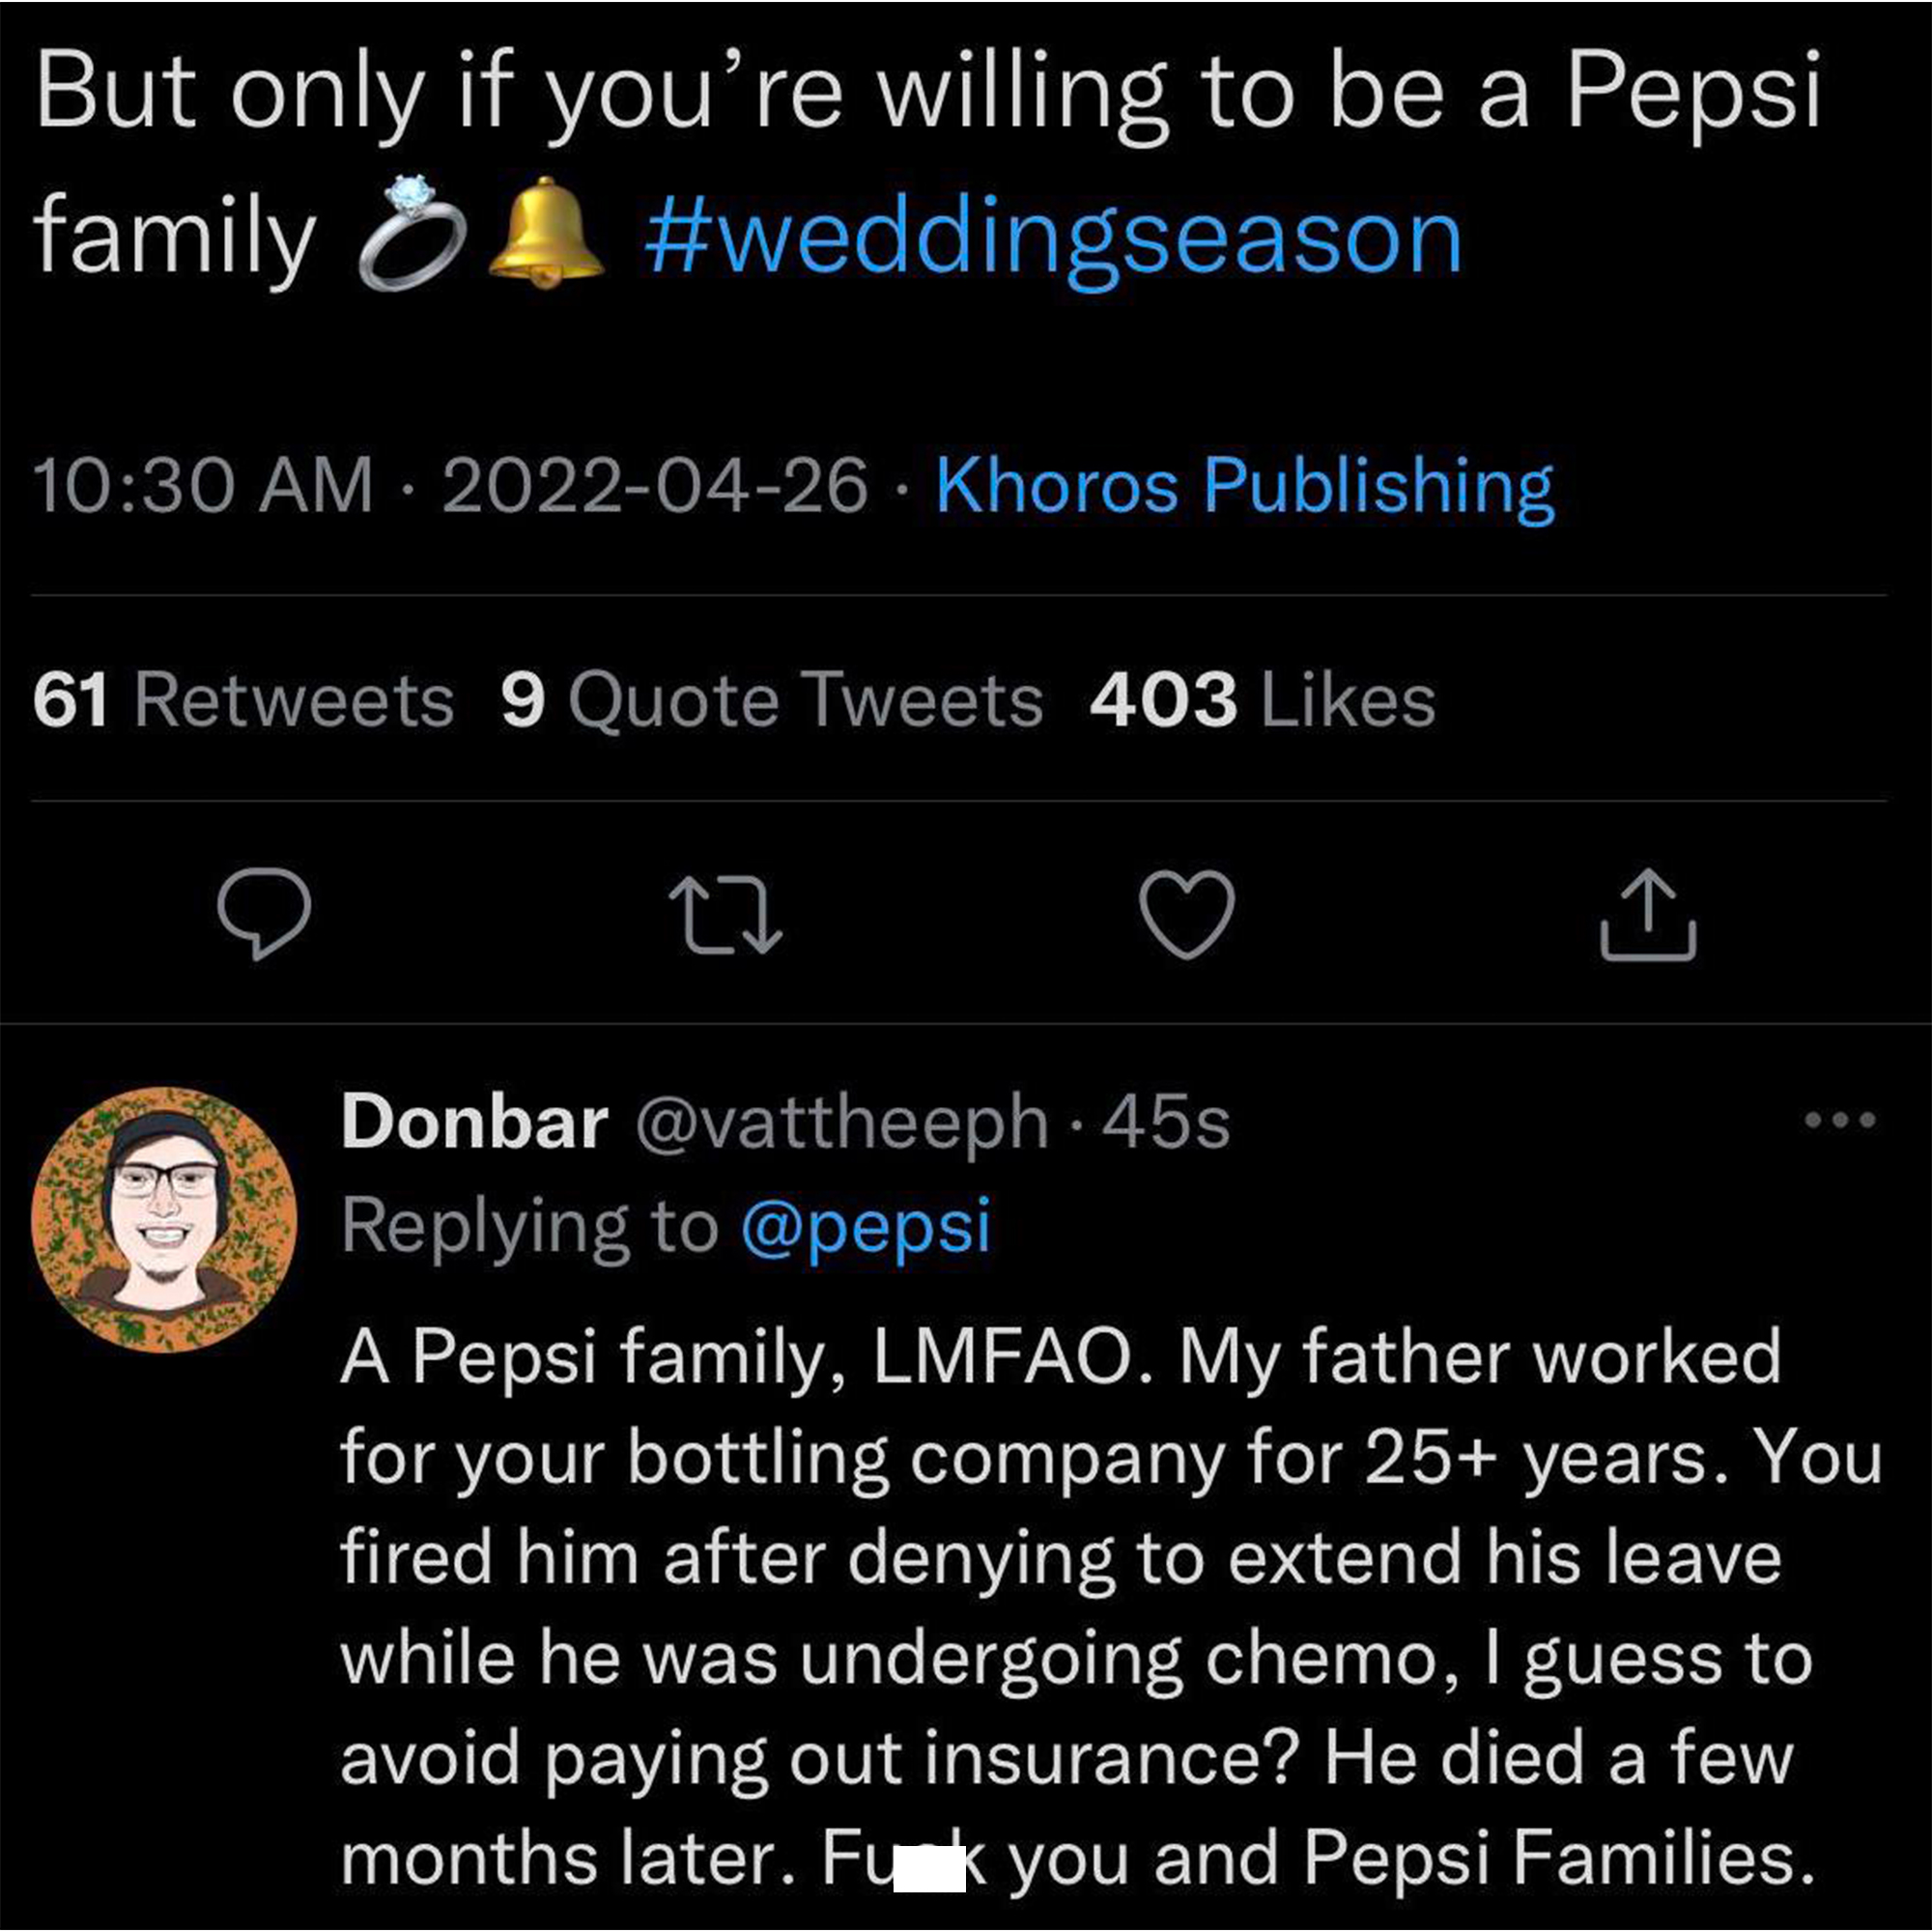 savage clapbacks - screenshot - But only if you're willing to be a Pepsi family . .Khoros Publishing 61 9 Quote Tweets 403 27 Donbar .45s A Pepsi family, Lmfao. My father worked for your bottling company for 25 years. You fired him after denying to extend